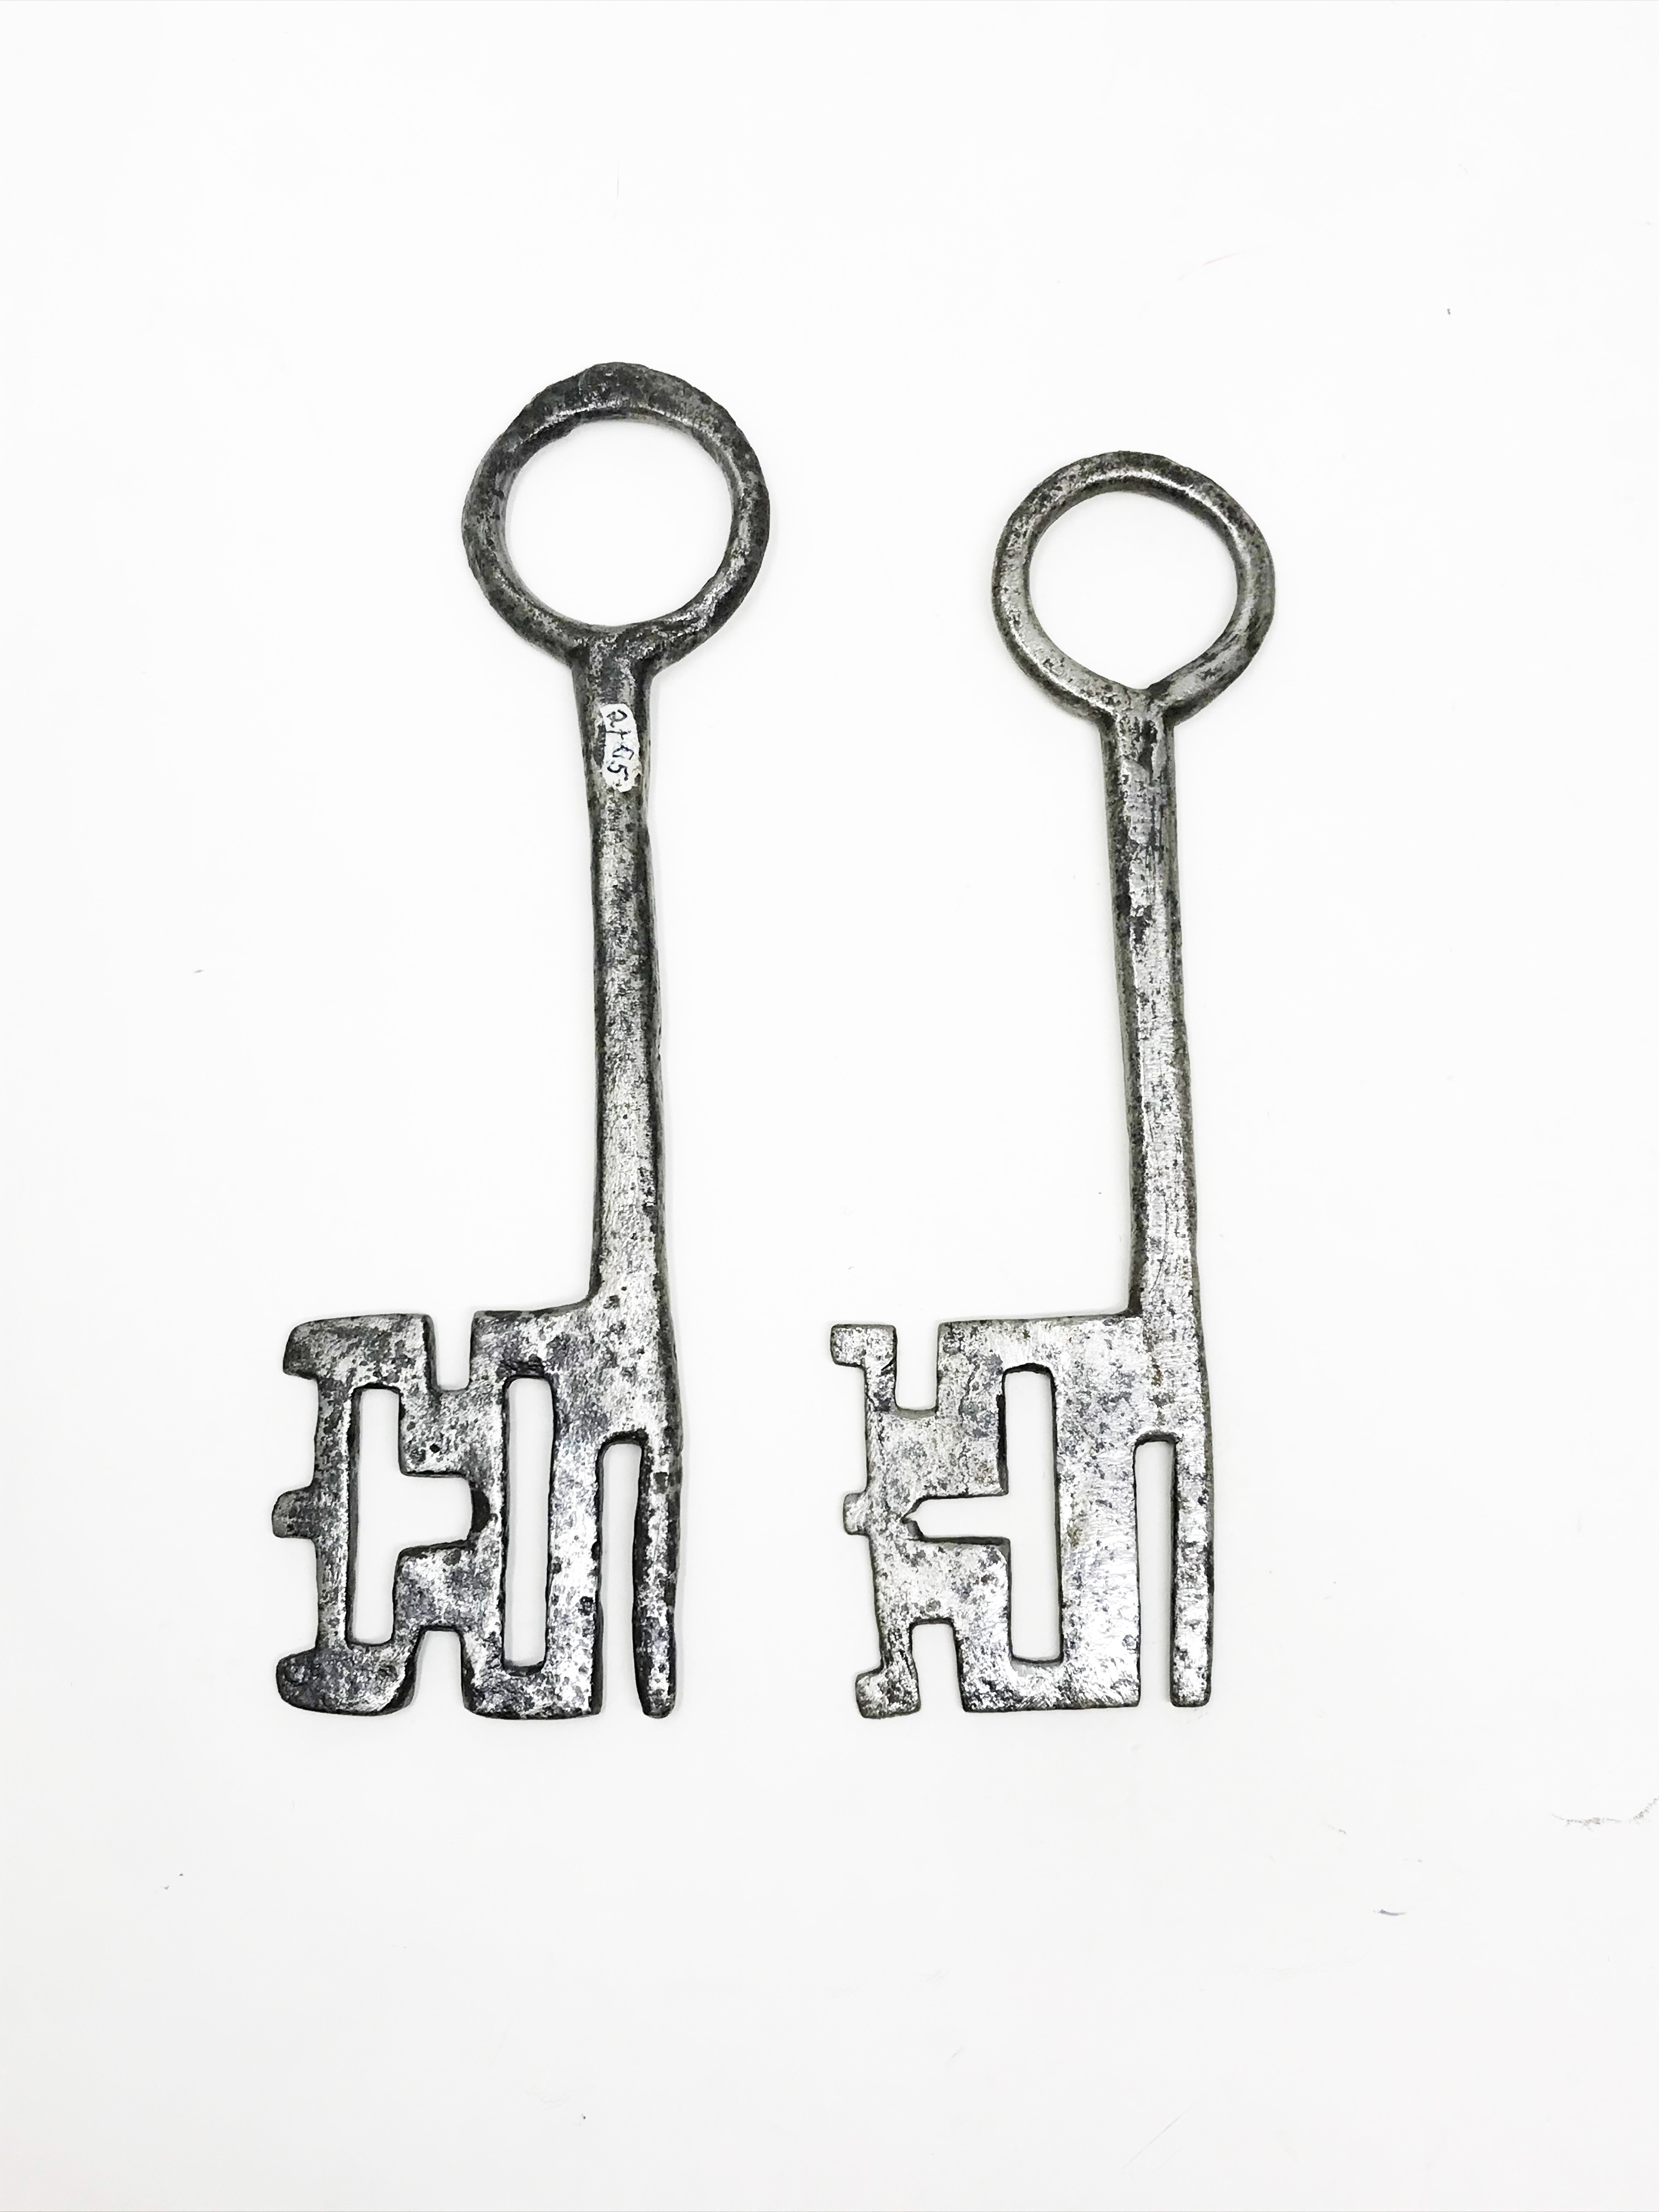 Two gothic keys19, 8 - 18, 2 cm.Part of the chapter "From the Time of the Cathedrals".